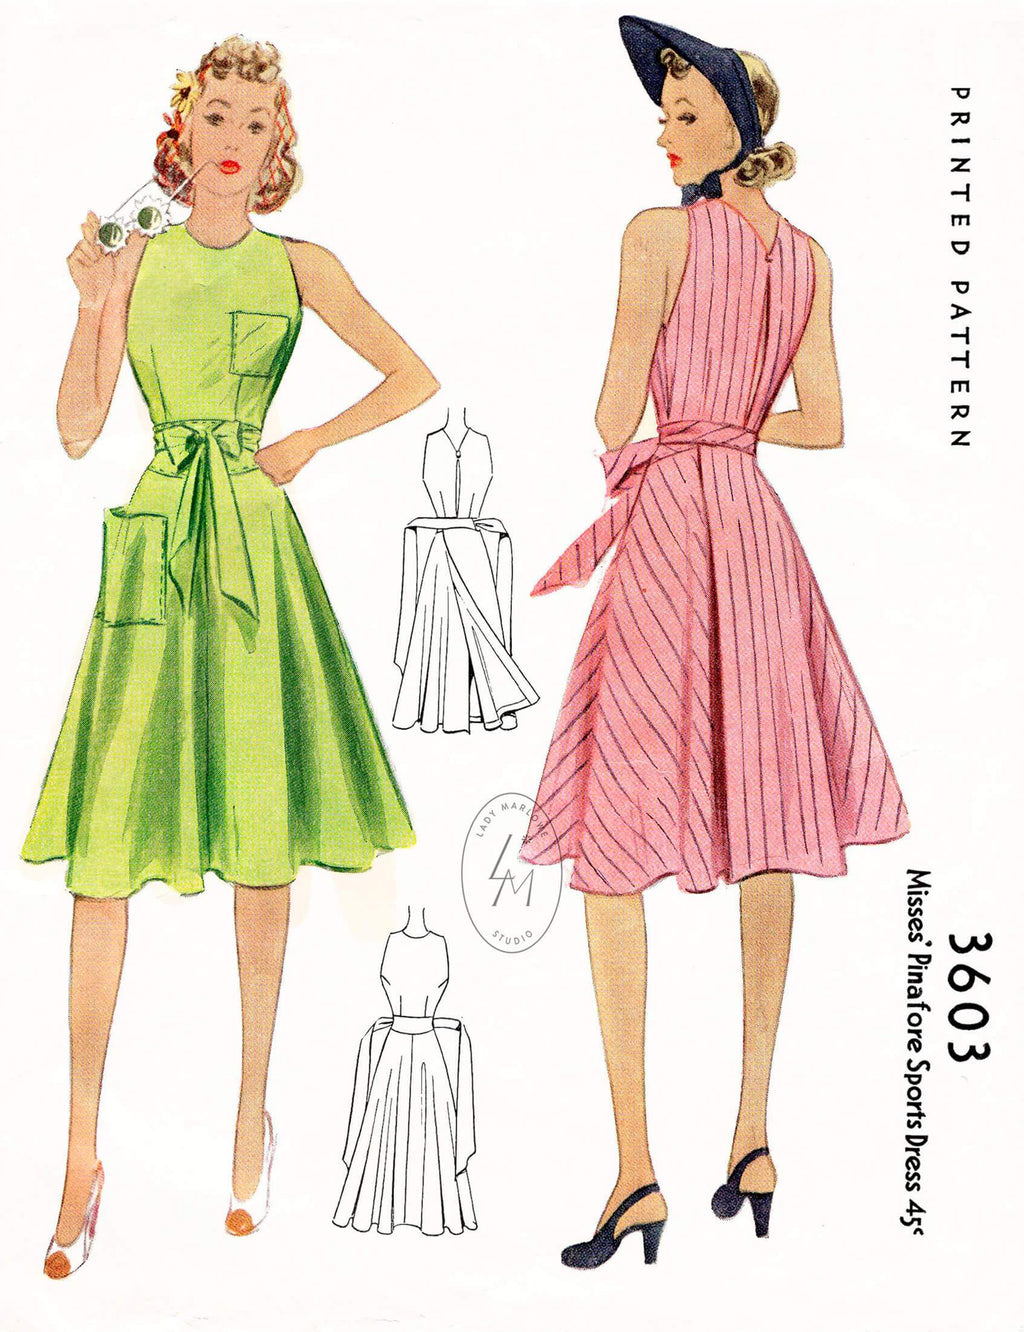 McCall 3603 1940s pinafore sun dress wrap skirt pocket detail vintage sewing pattern reproduction